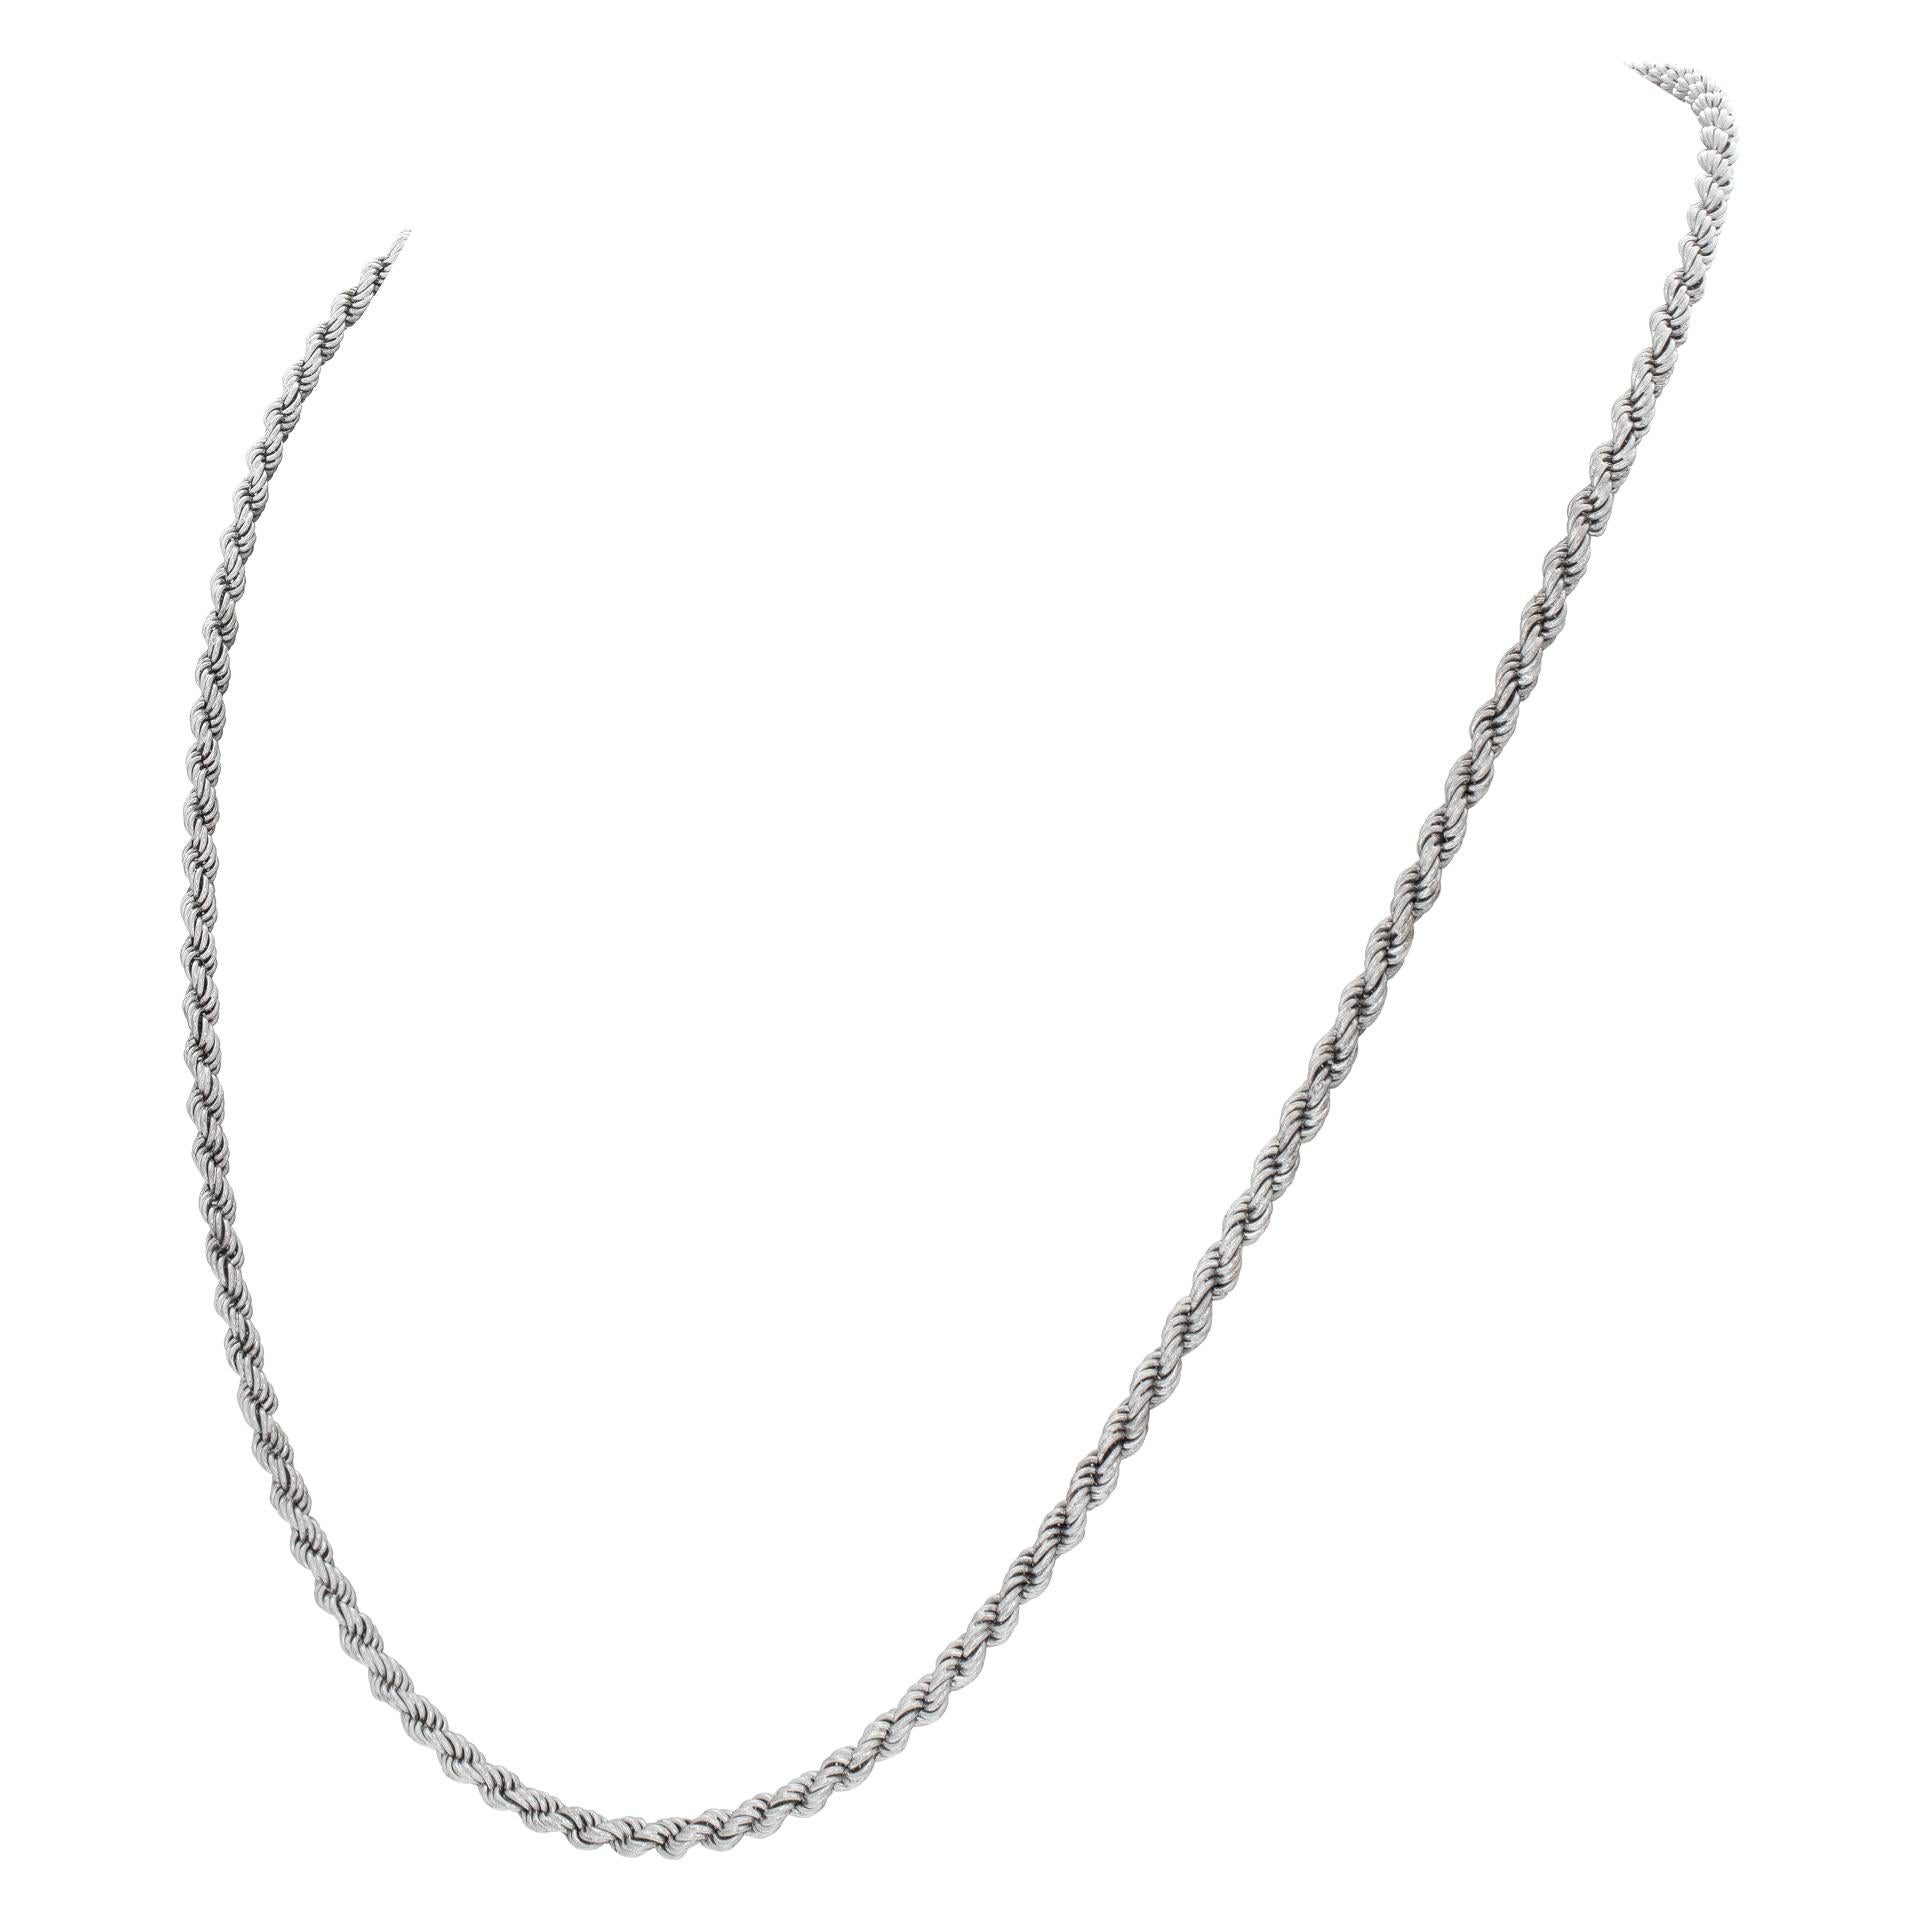 19 inch necklace length